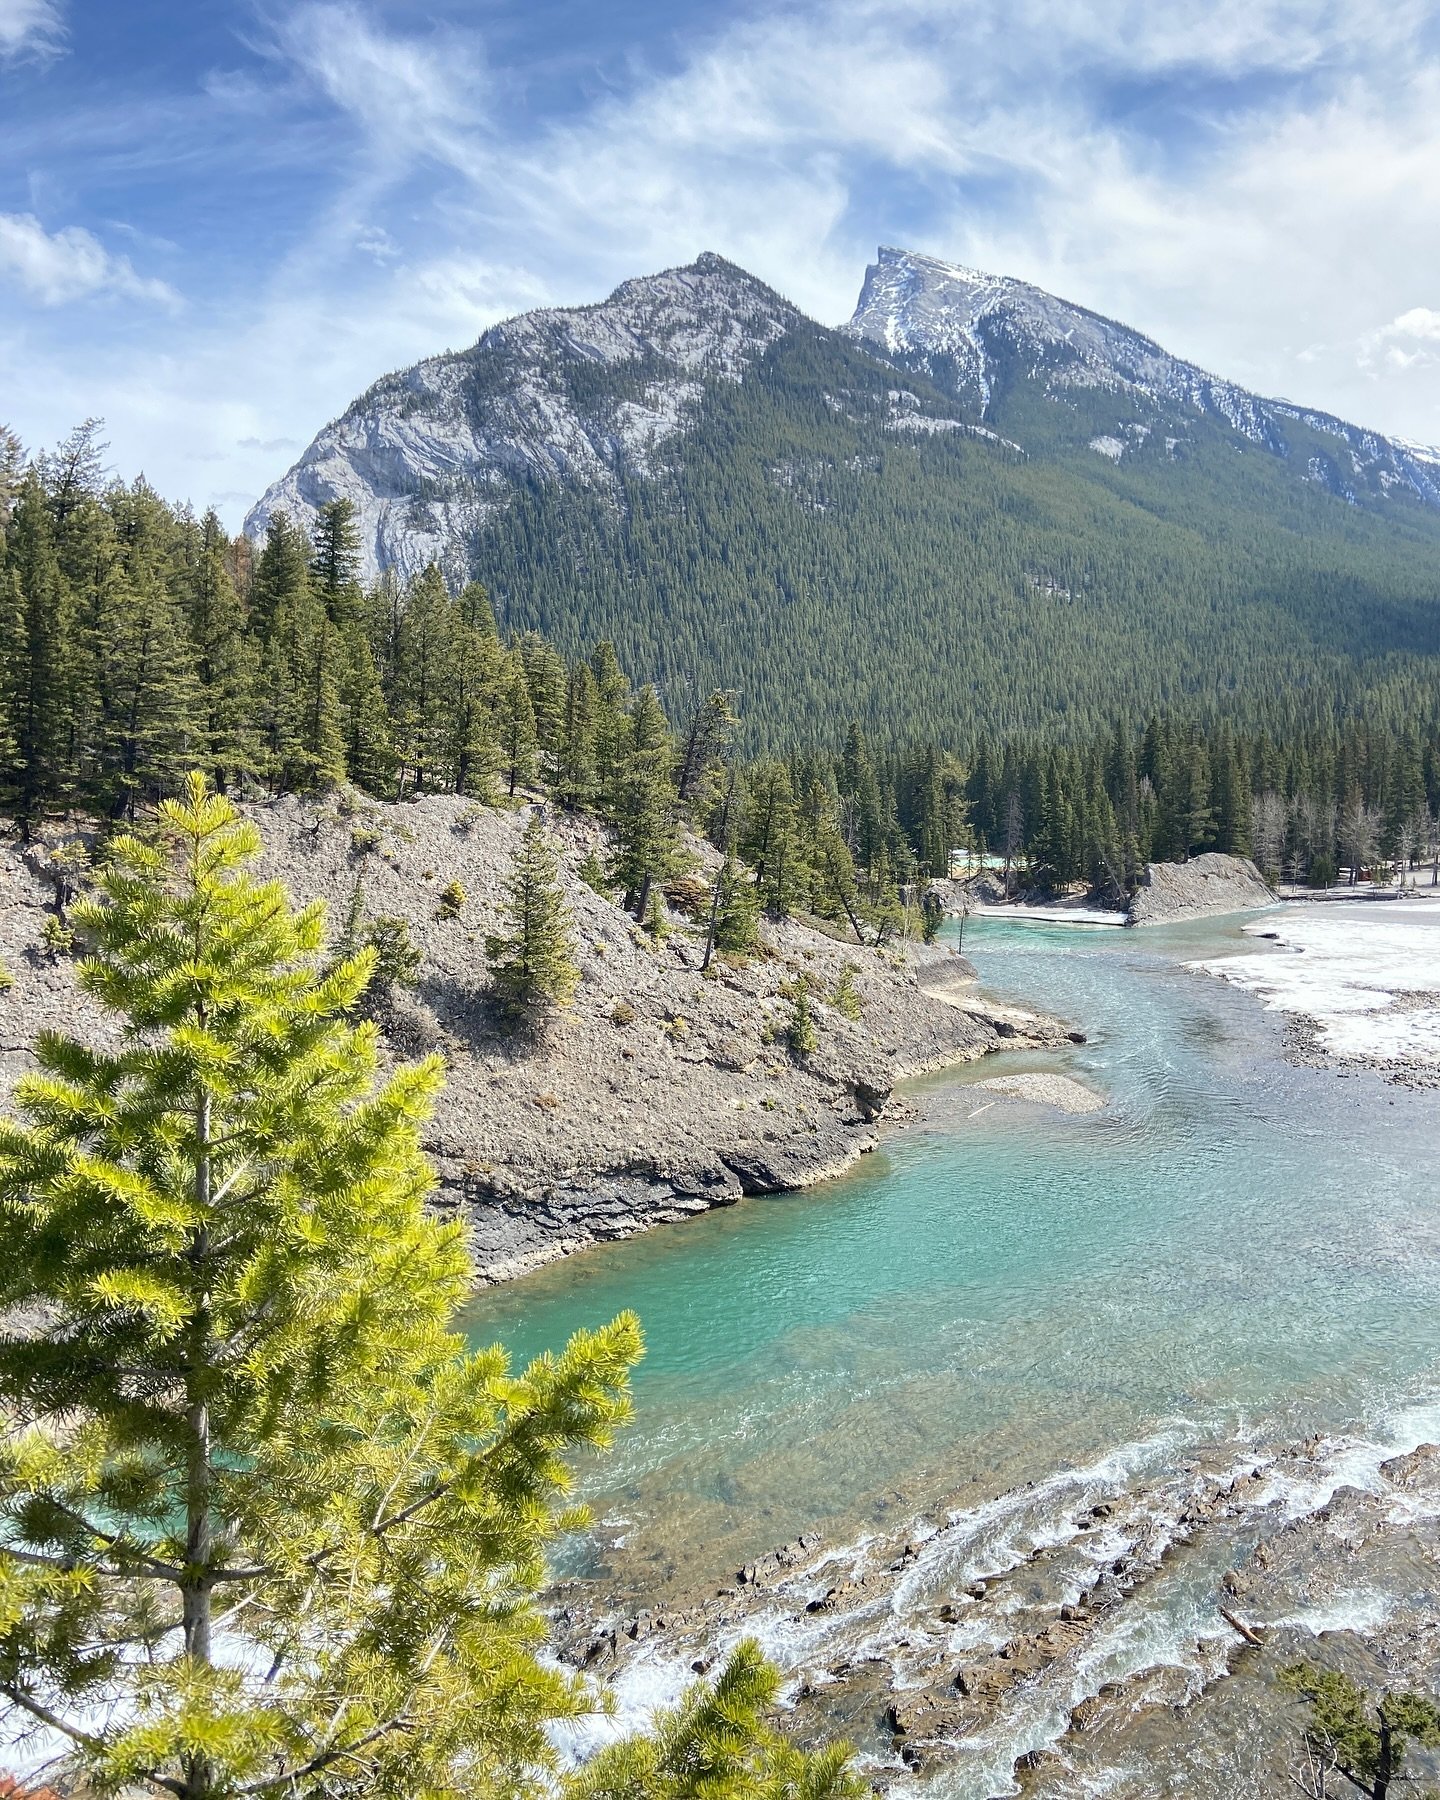 Bow River meandering towards Mount Rundle in Banff